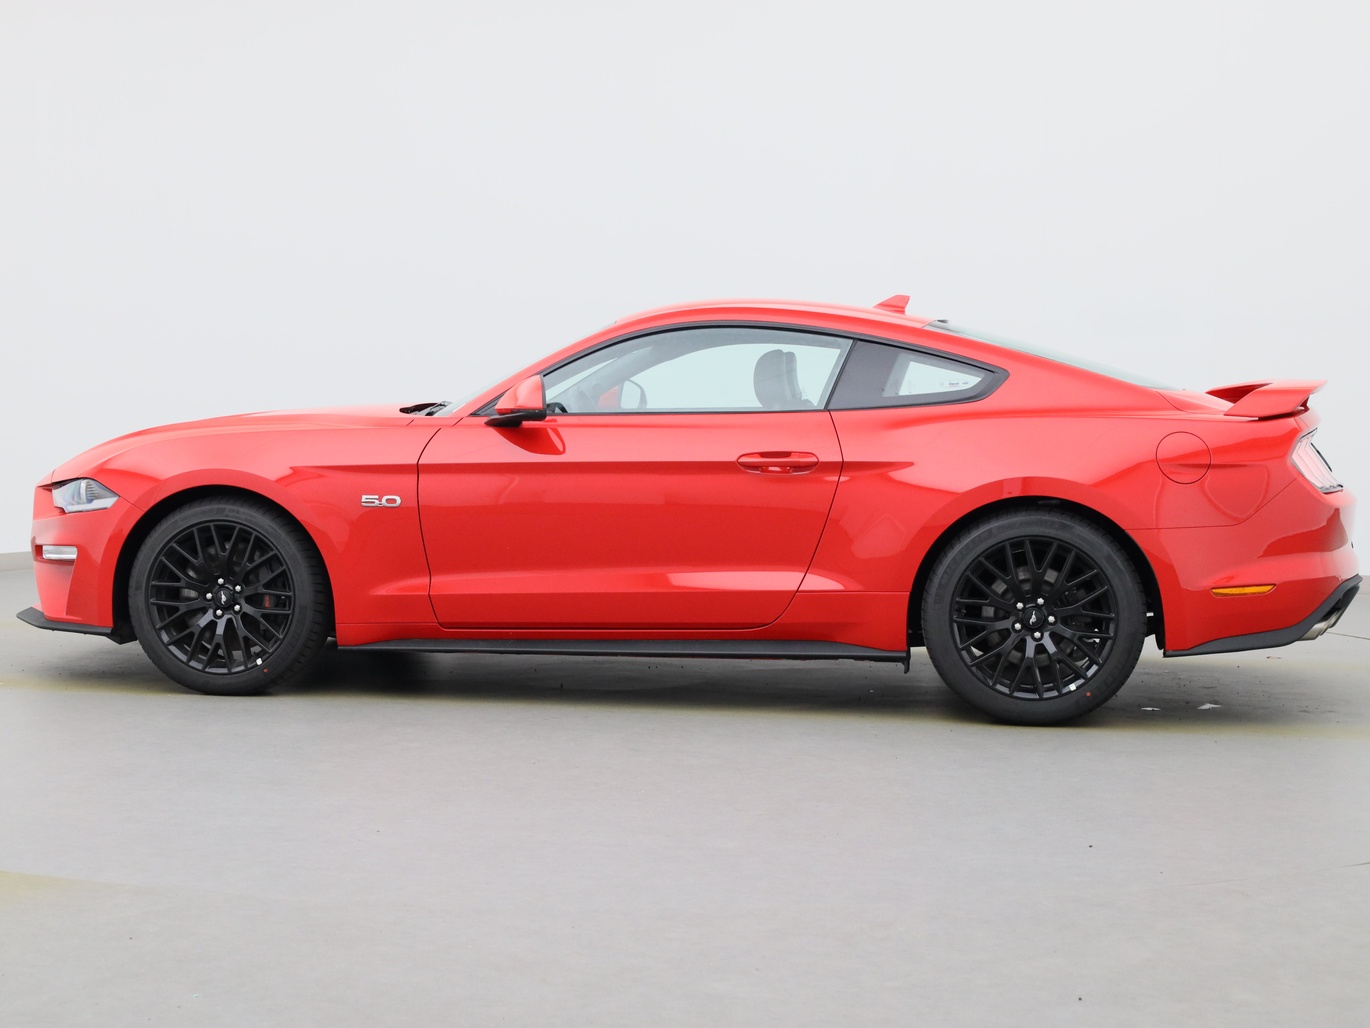  Ford Mustang GT Coupé V8 450PS / Premium 2 / Magne in Race-rot von Links